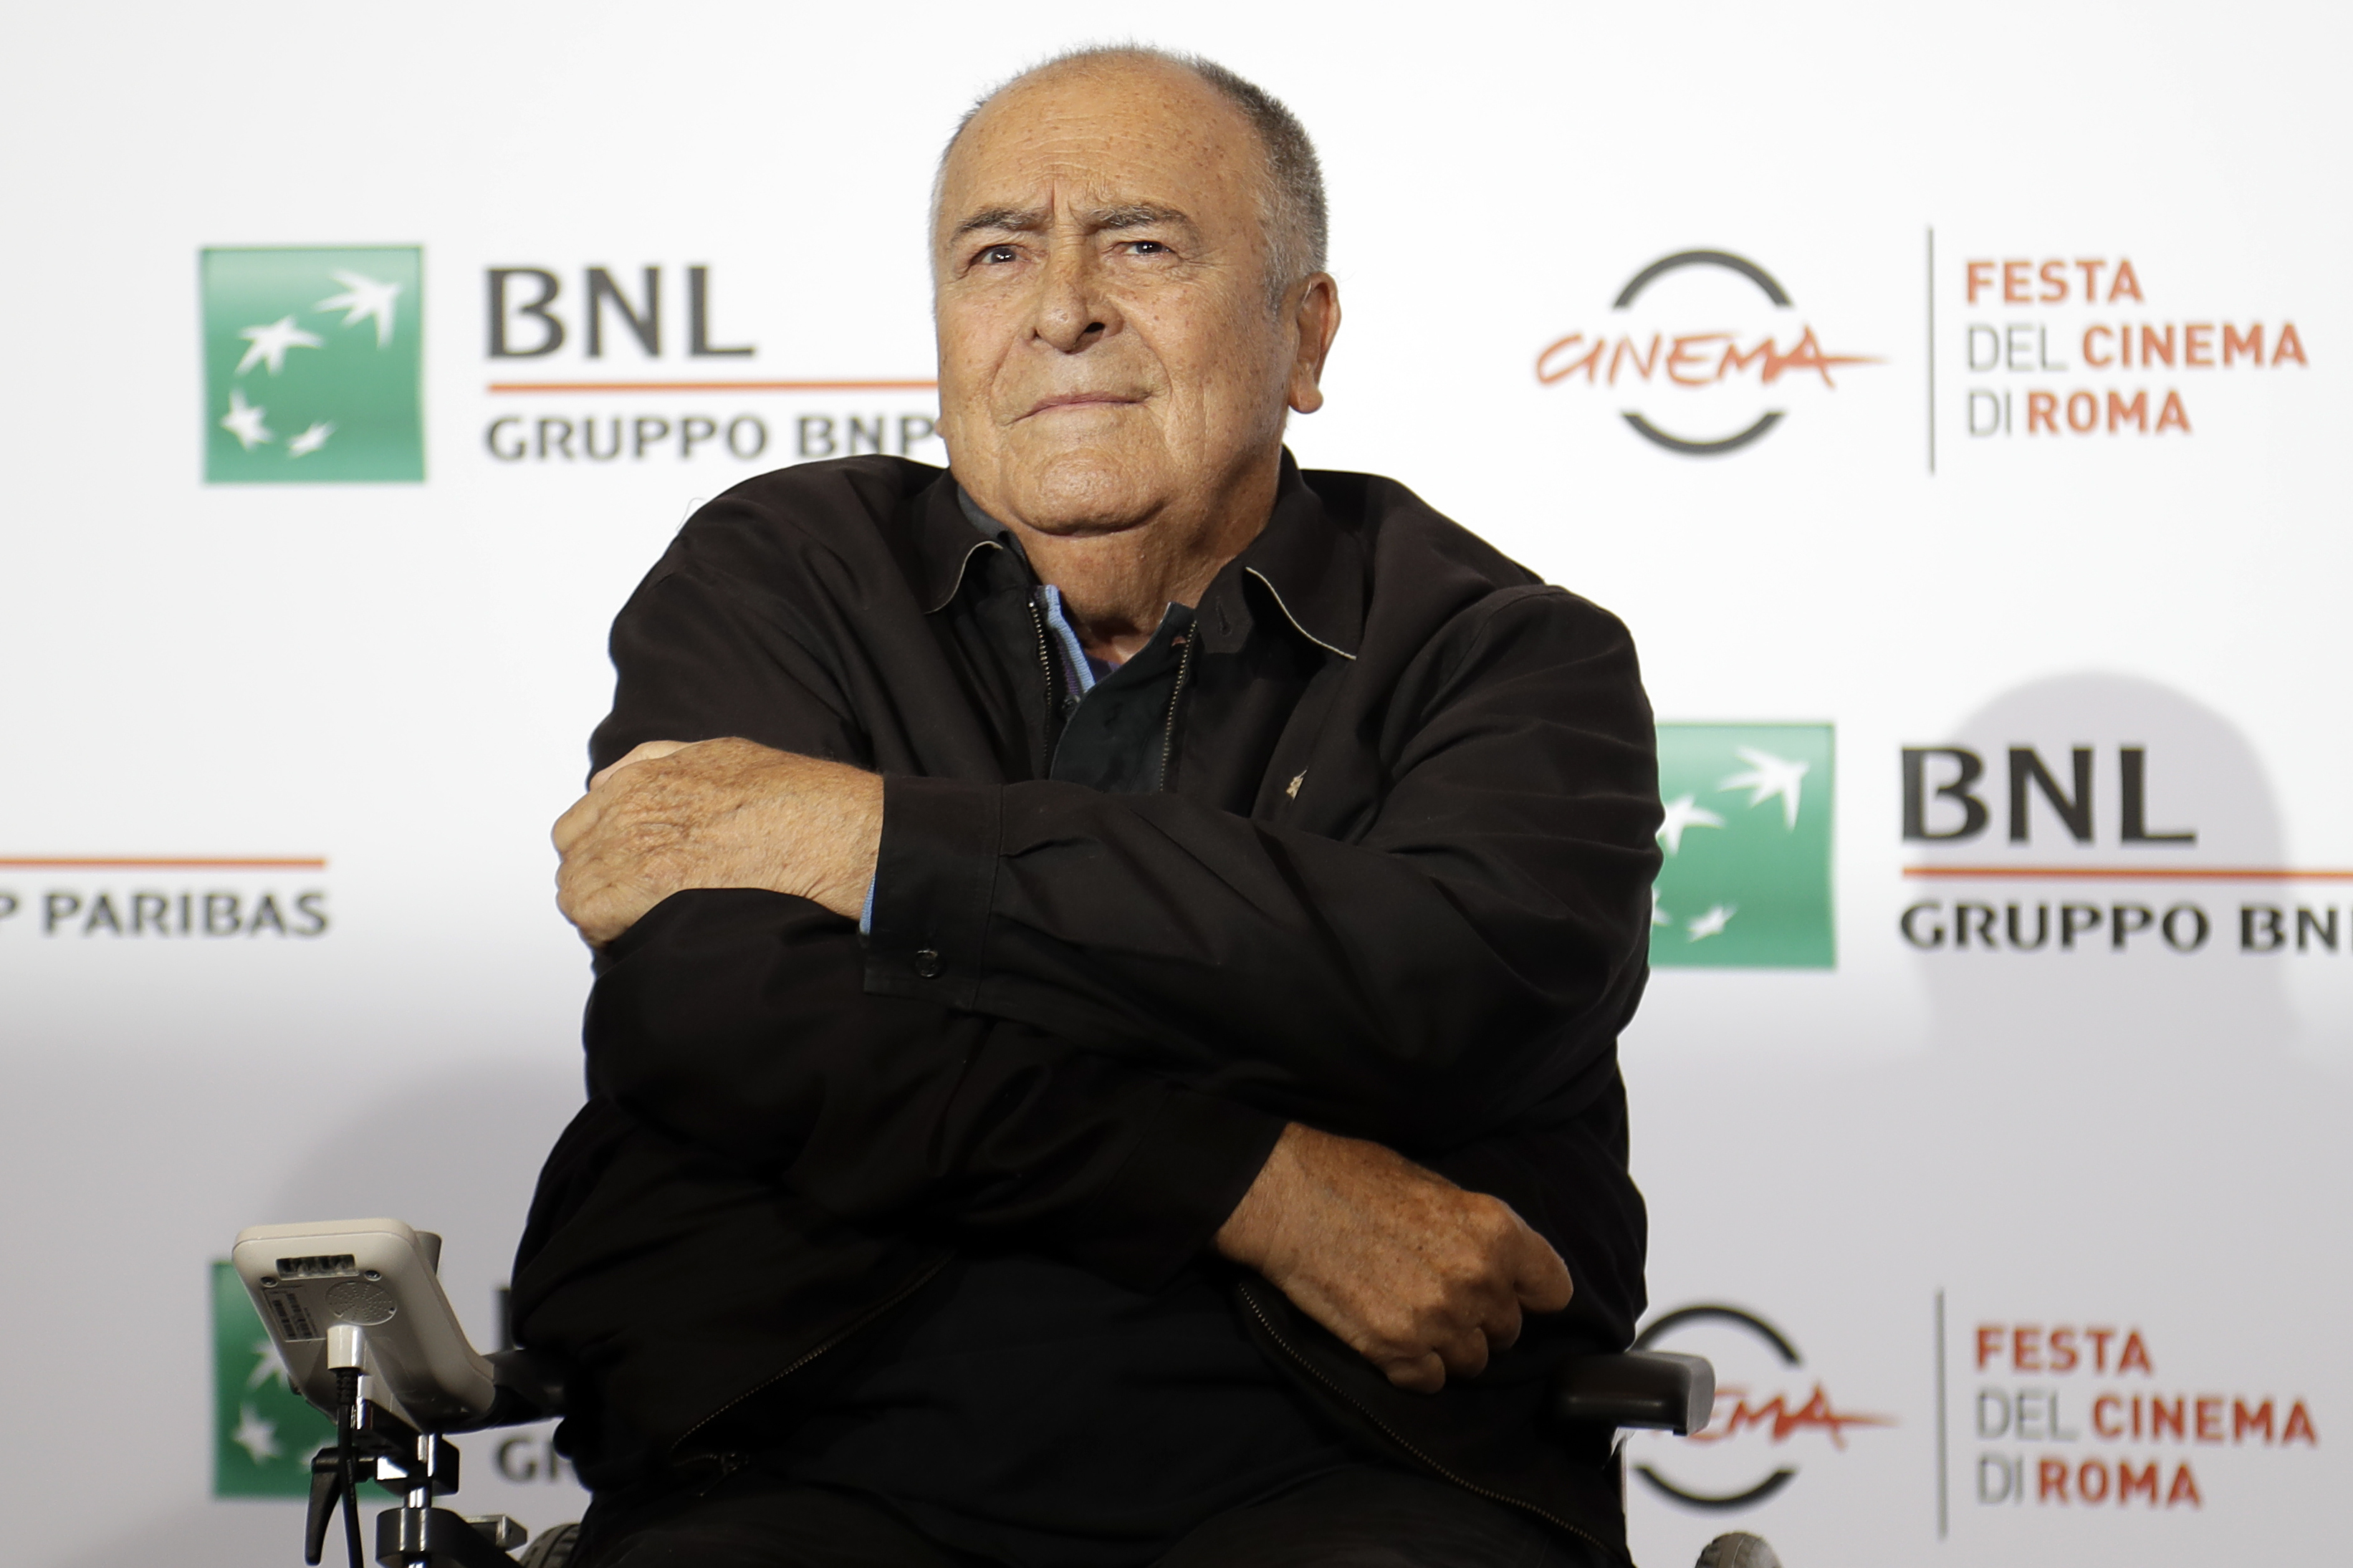 FILE - In this Oct. 15, 2016, file photo, director Bernardo Bertolucci poses for photographers during a photo call at the Rome Film festival in Rome. A recently unearthed video interview with Bertolucci from 2013 has renewed interest, and outrage, over what happened to actress Maria Schneider on set during the infamous butter sex scene in “Last Tango in Paris”. (AP Photo/Gregorio Borgia, File)